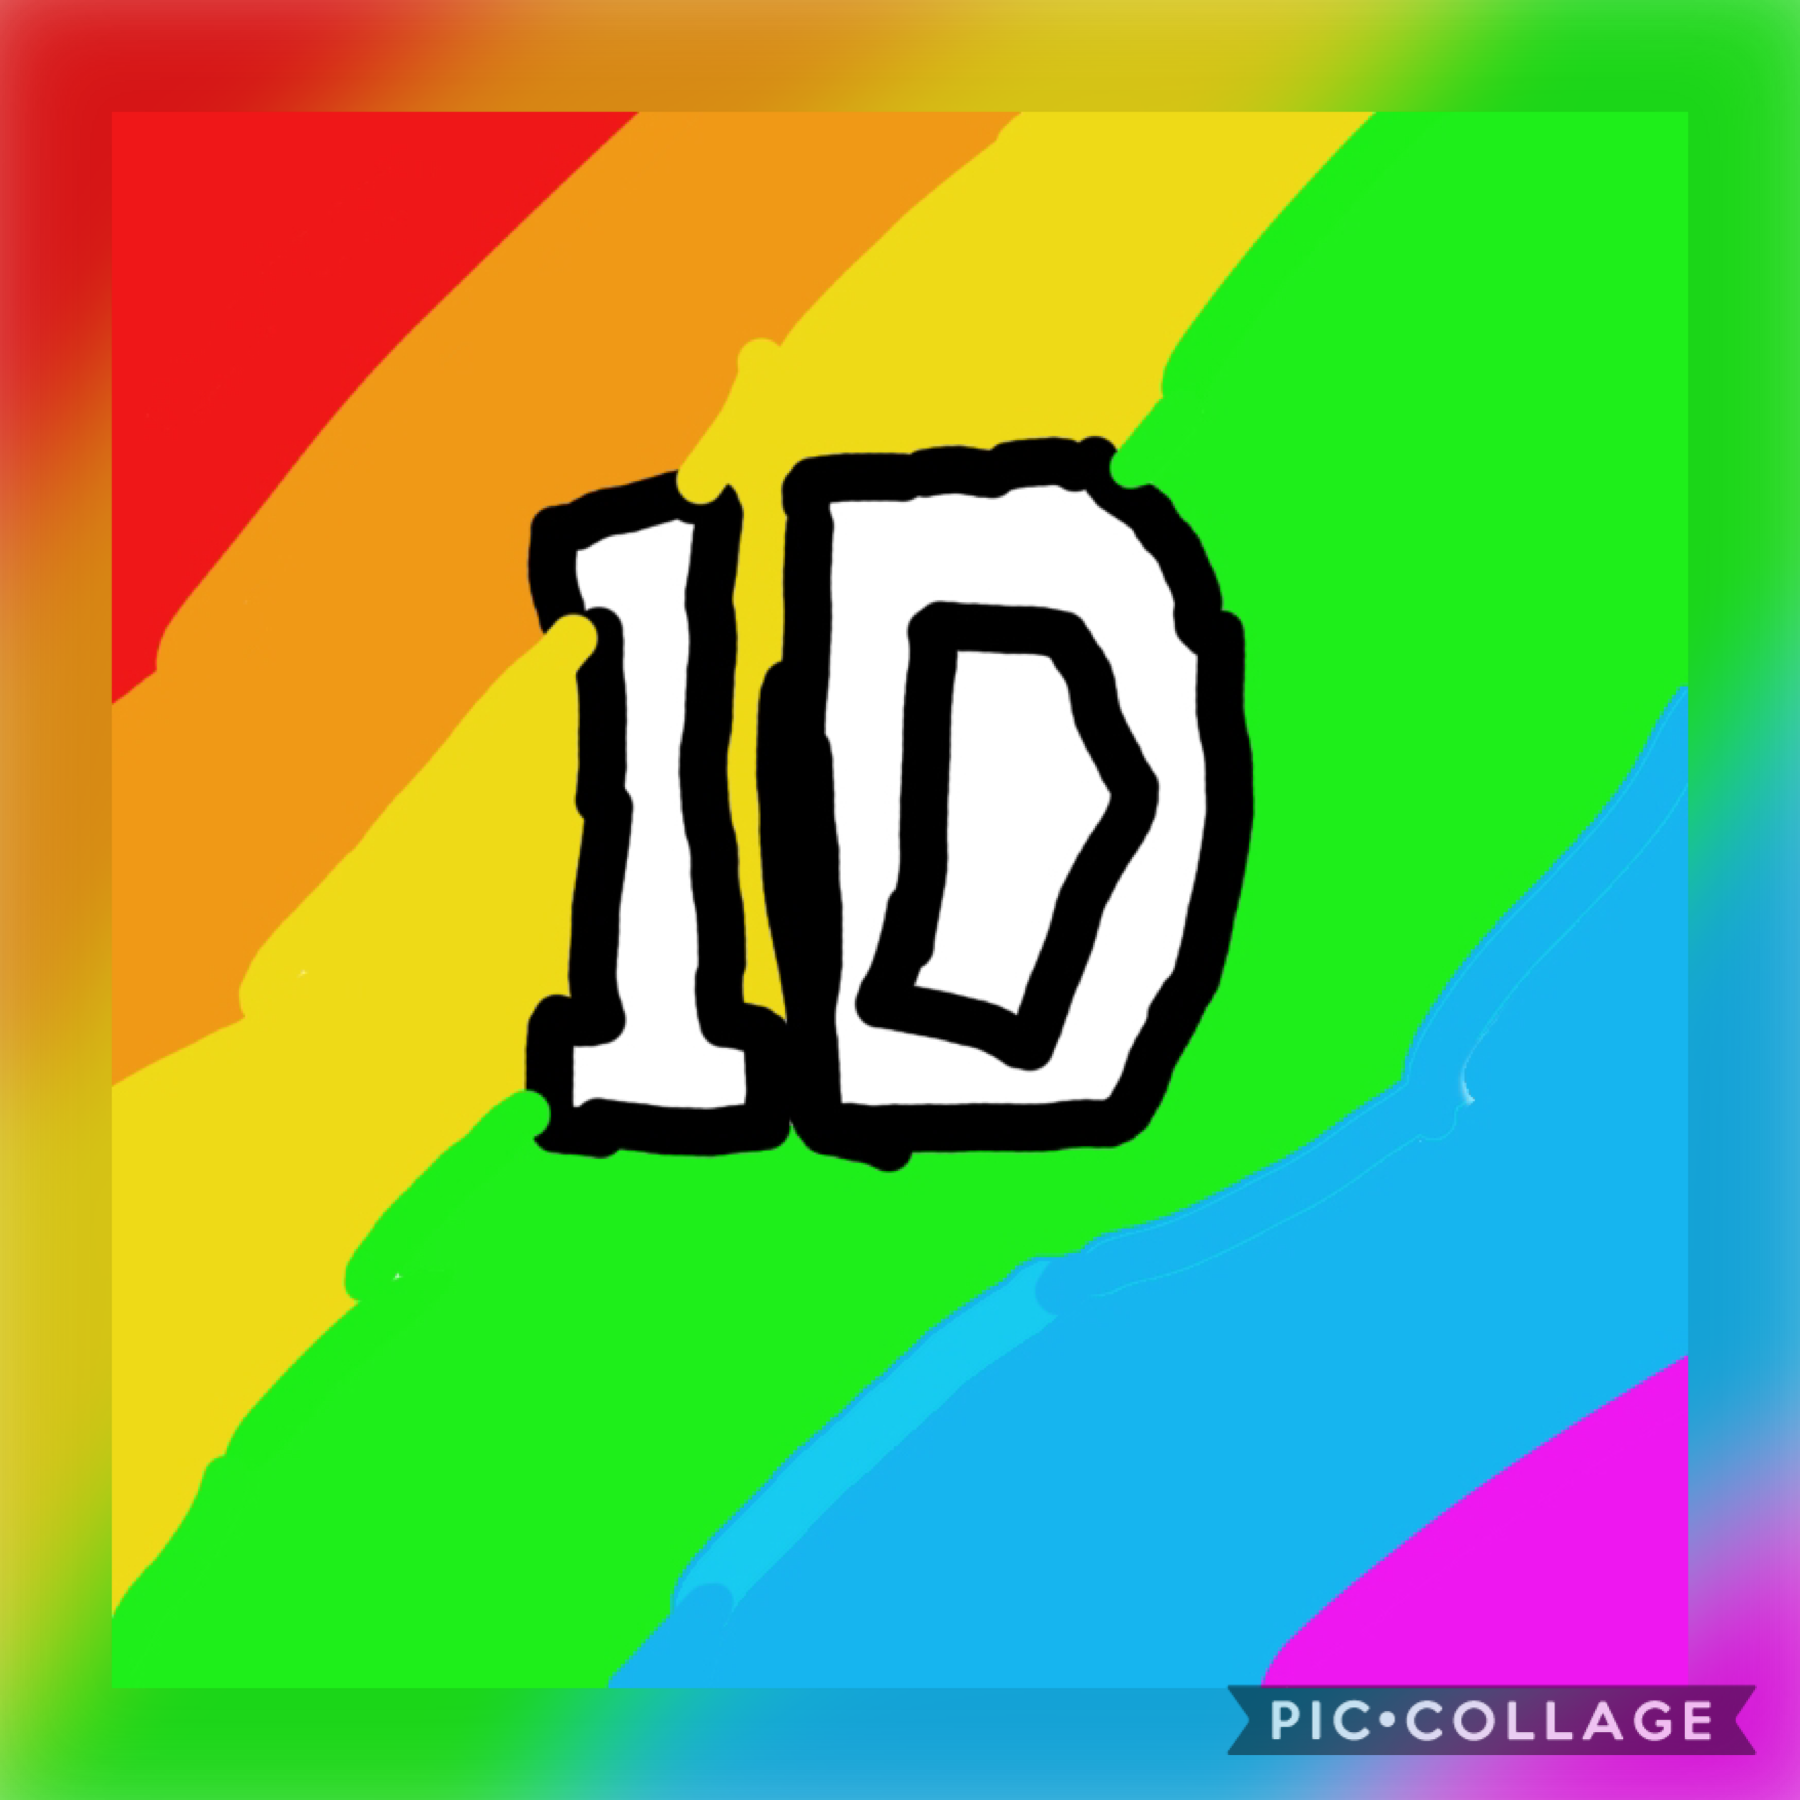 Happy 10th One Direction anniversary ❤️🧡💛💚💙💜